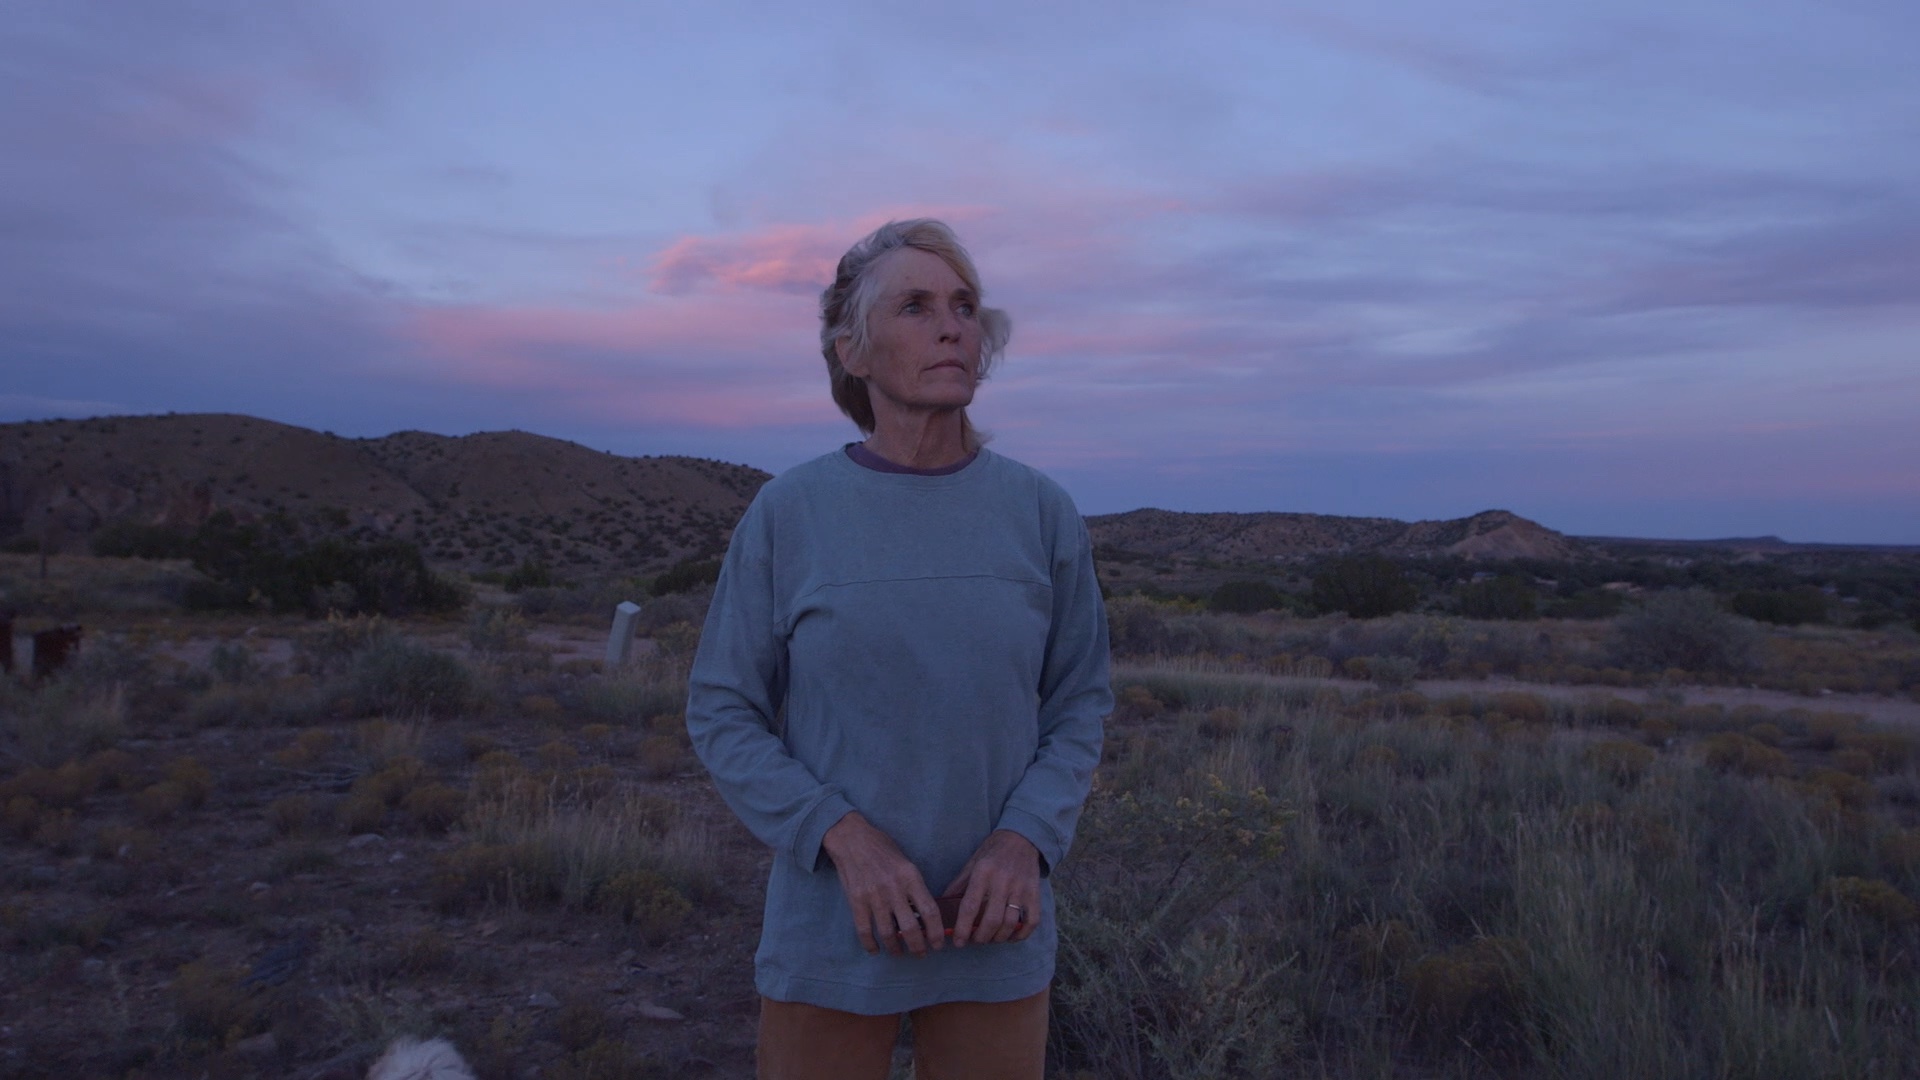 Older woman in desert with dramatic sky behind